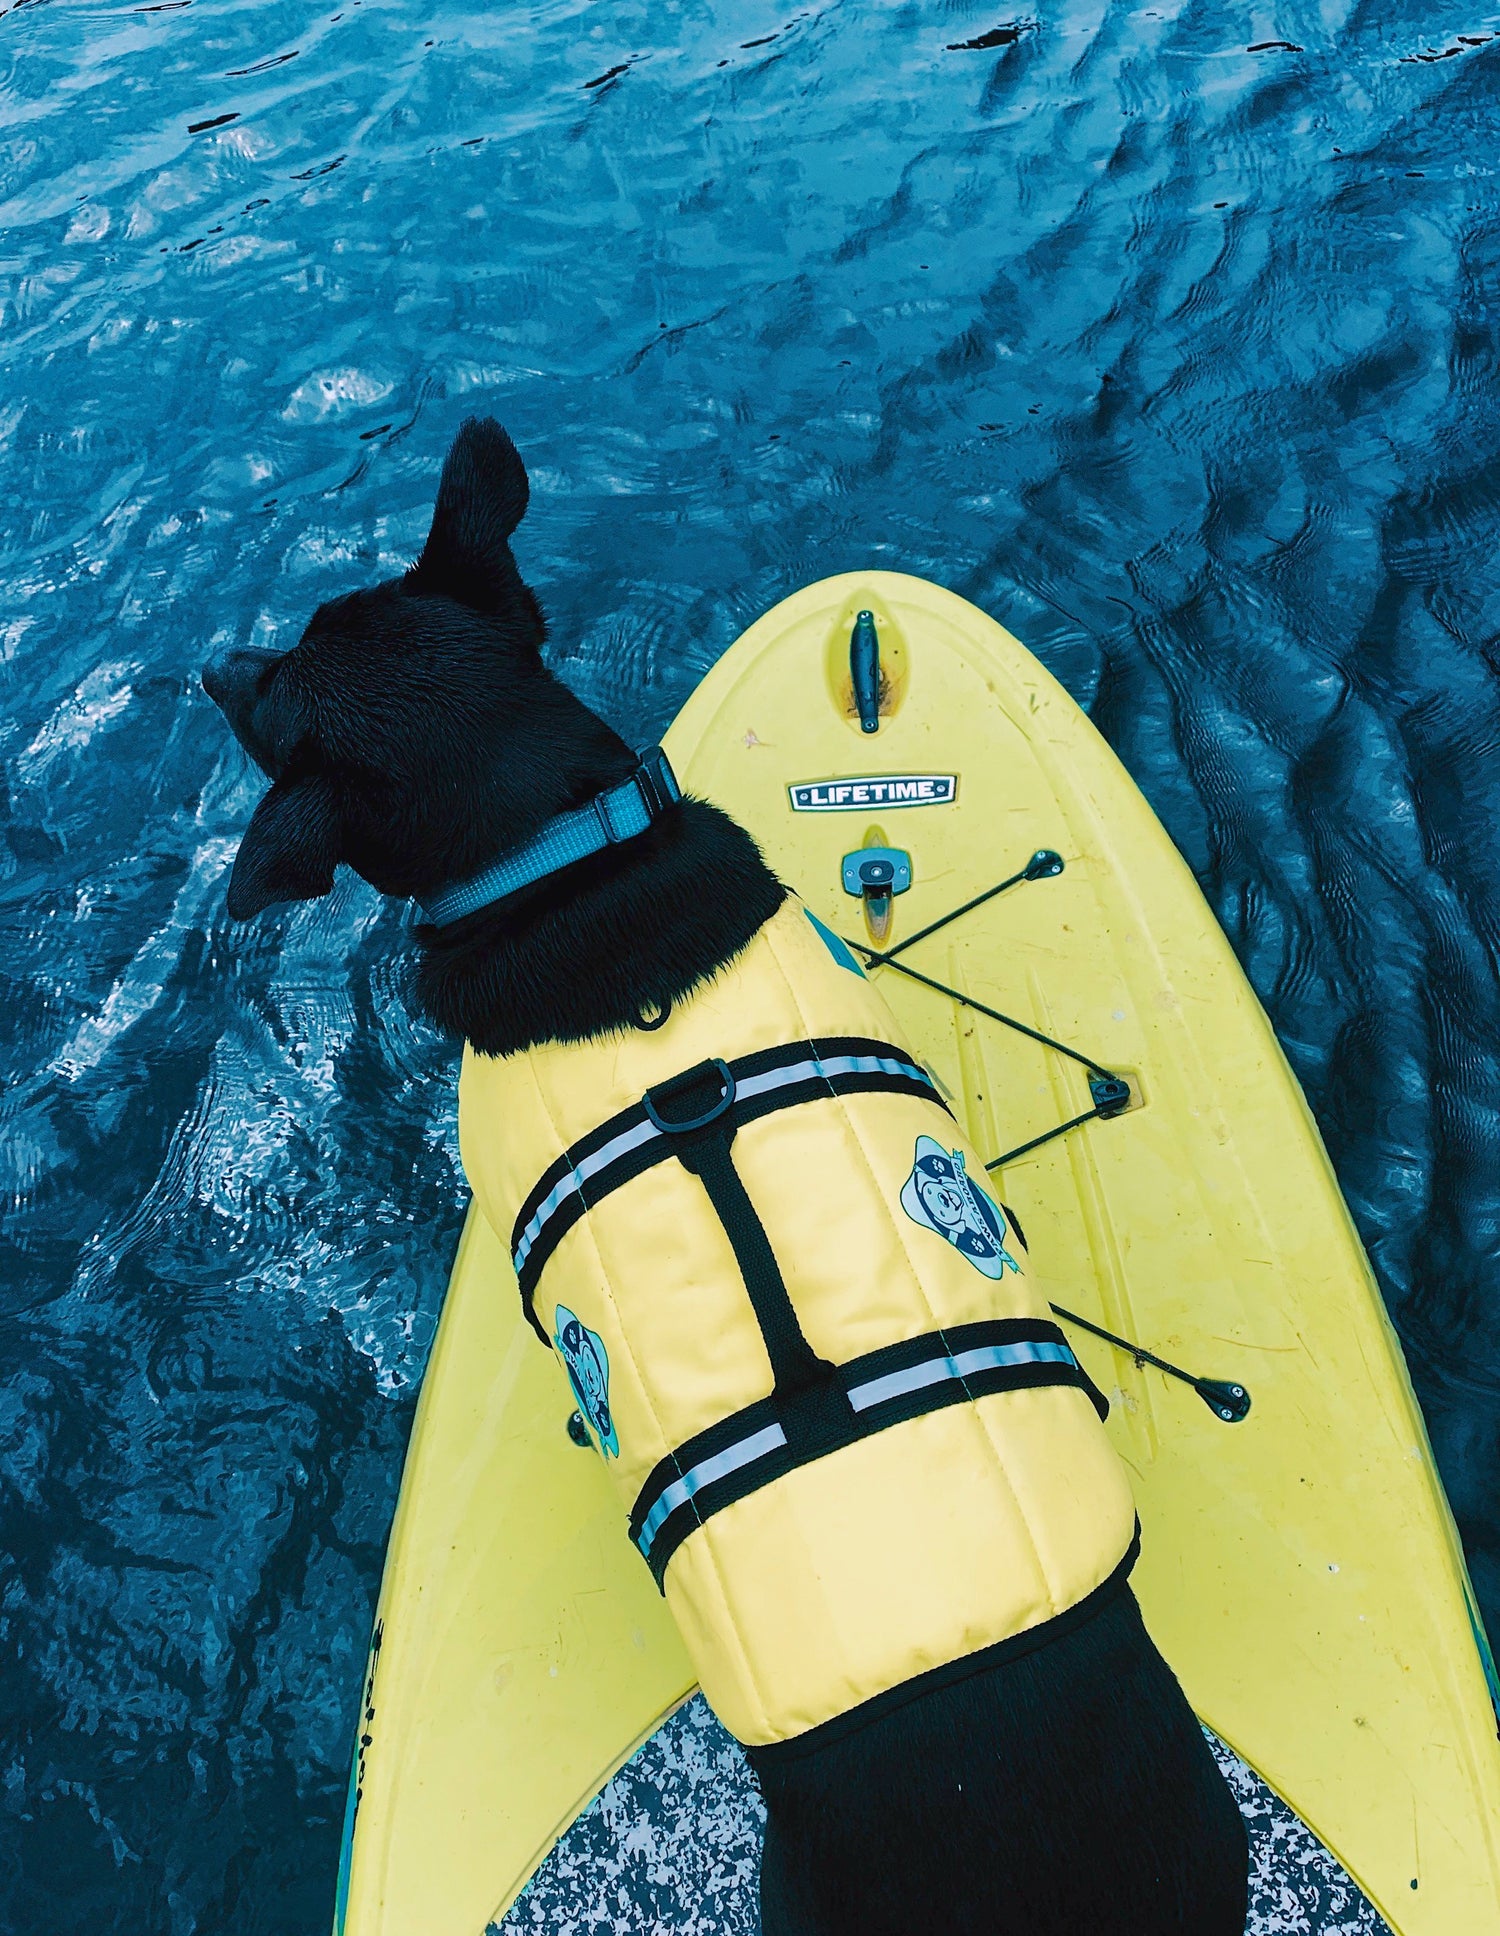 Black lab dog wearing a neon yellow Paws Aboard life jacket standing on a bright yellow paddle board in deep blue waters.